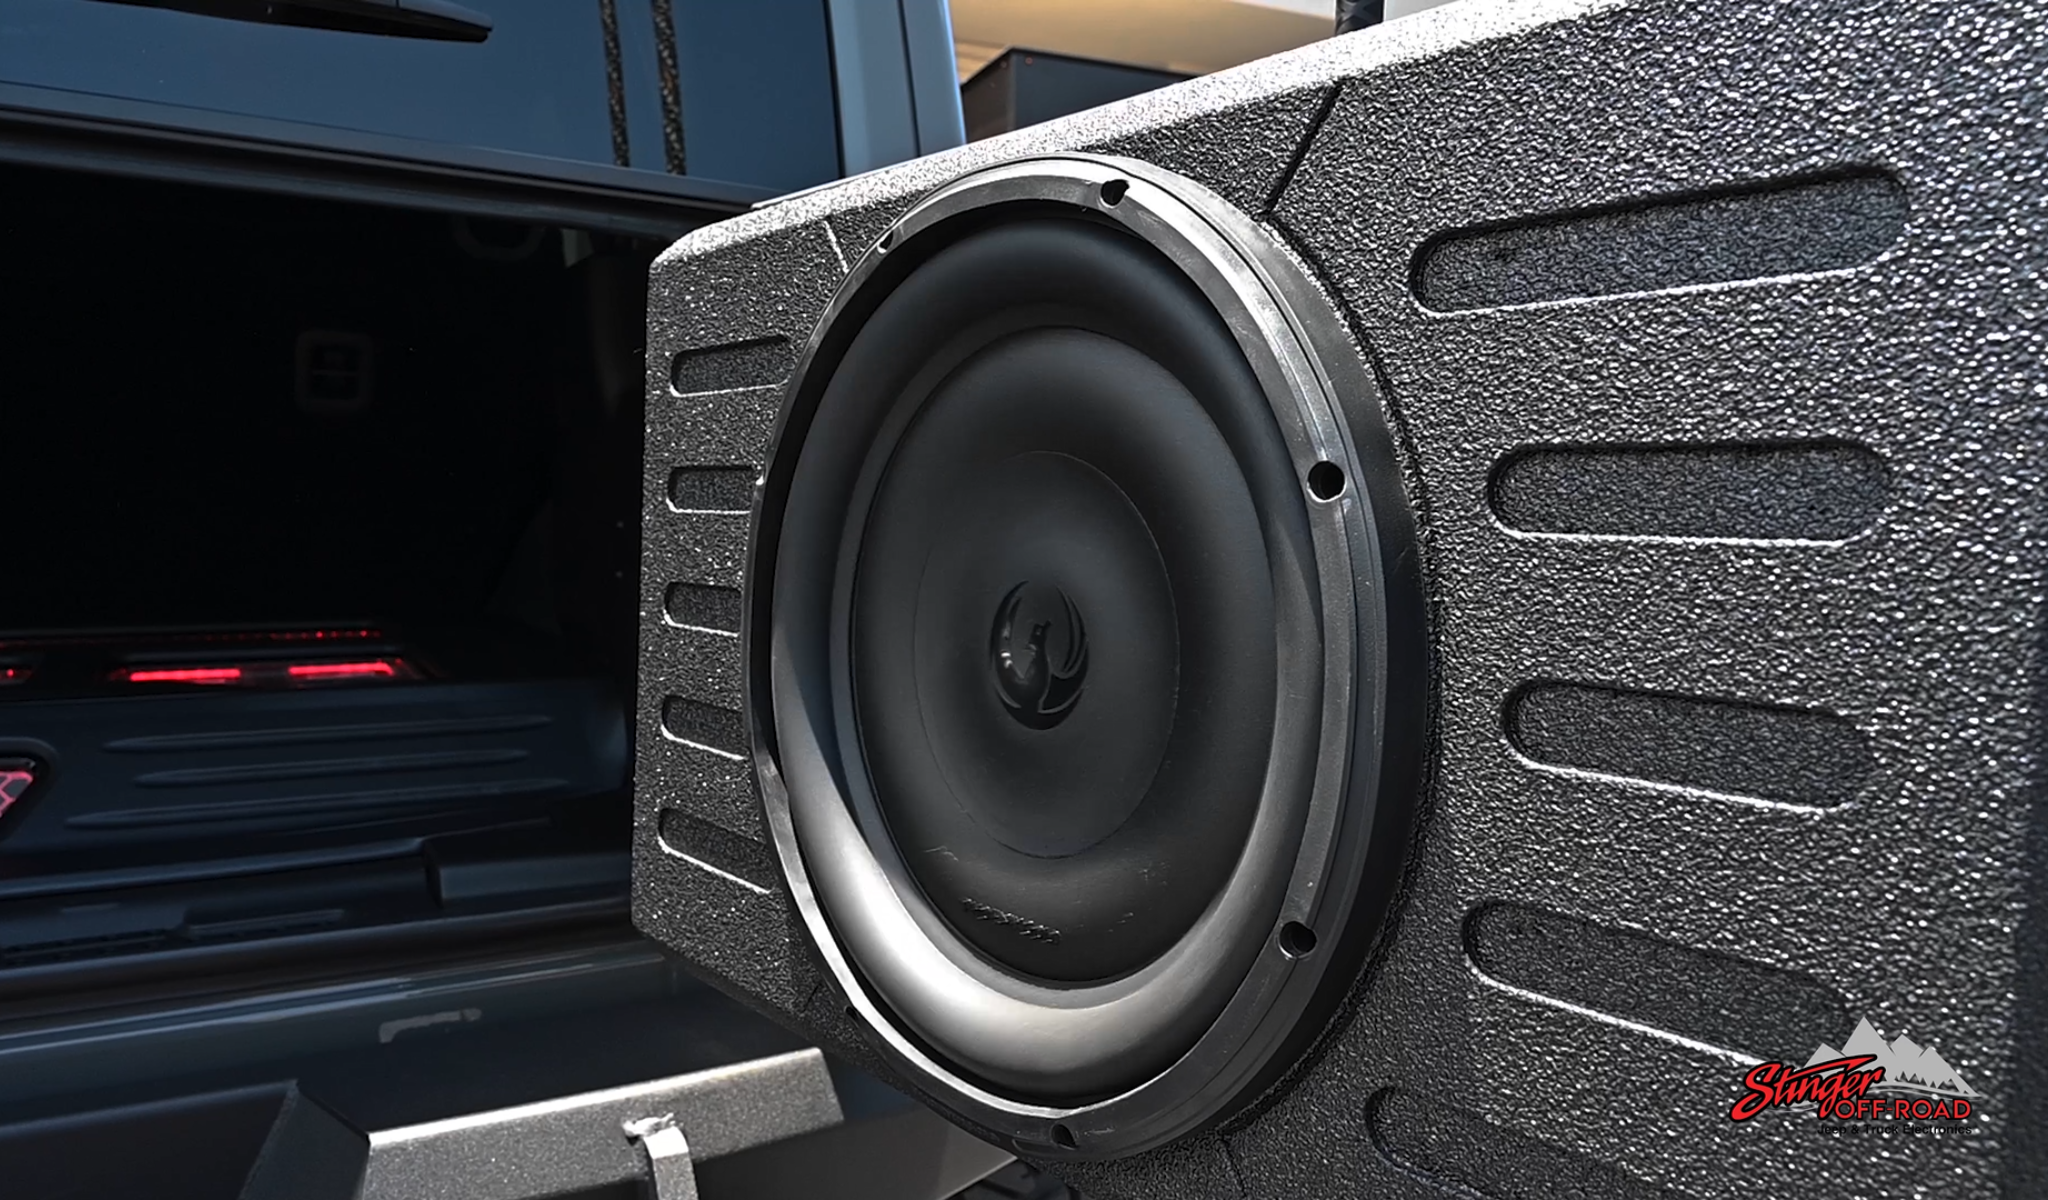 Jeep Audio | Speakers, Amplifiers, and More